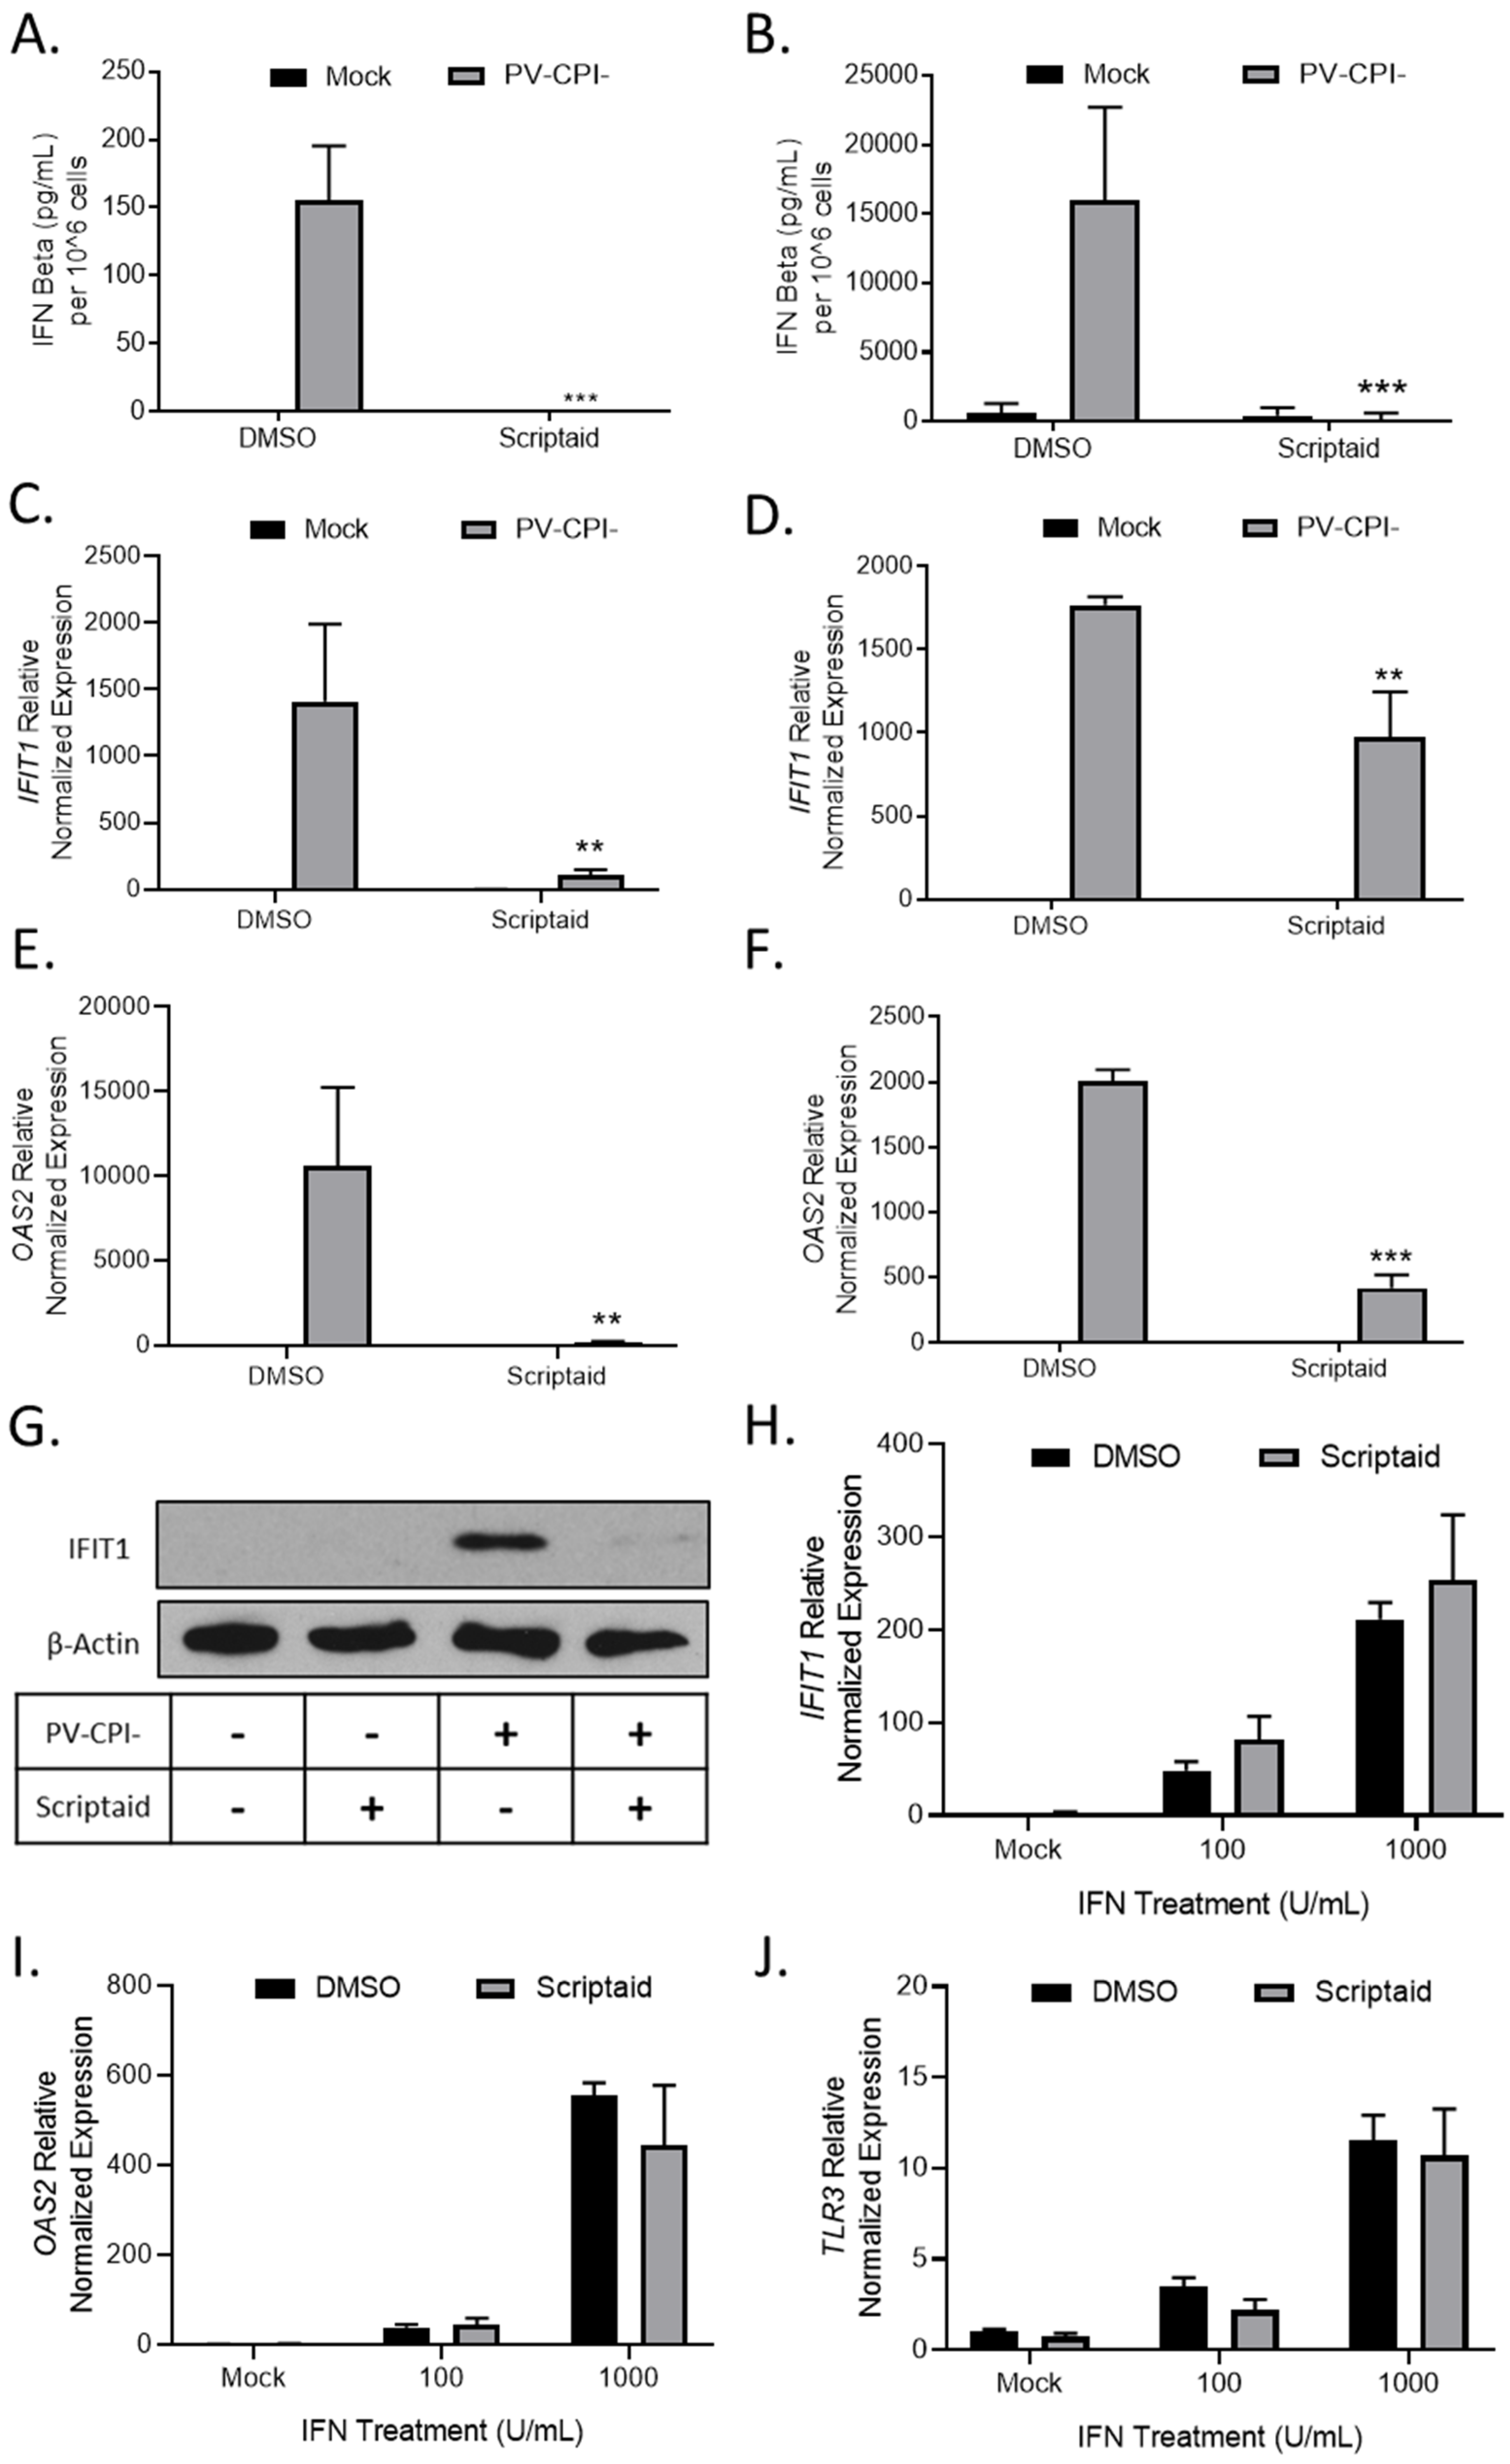 Viruses Free Full Text Histone Deacetylase Inhibitors Enhance Cell Killing And Block Interferon Beta Synthesis Elicited By Infection With An Oncolytic Parainfluenza Virus Html